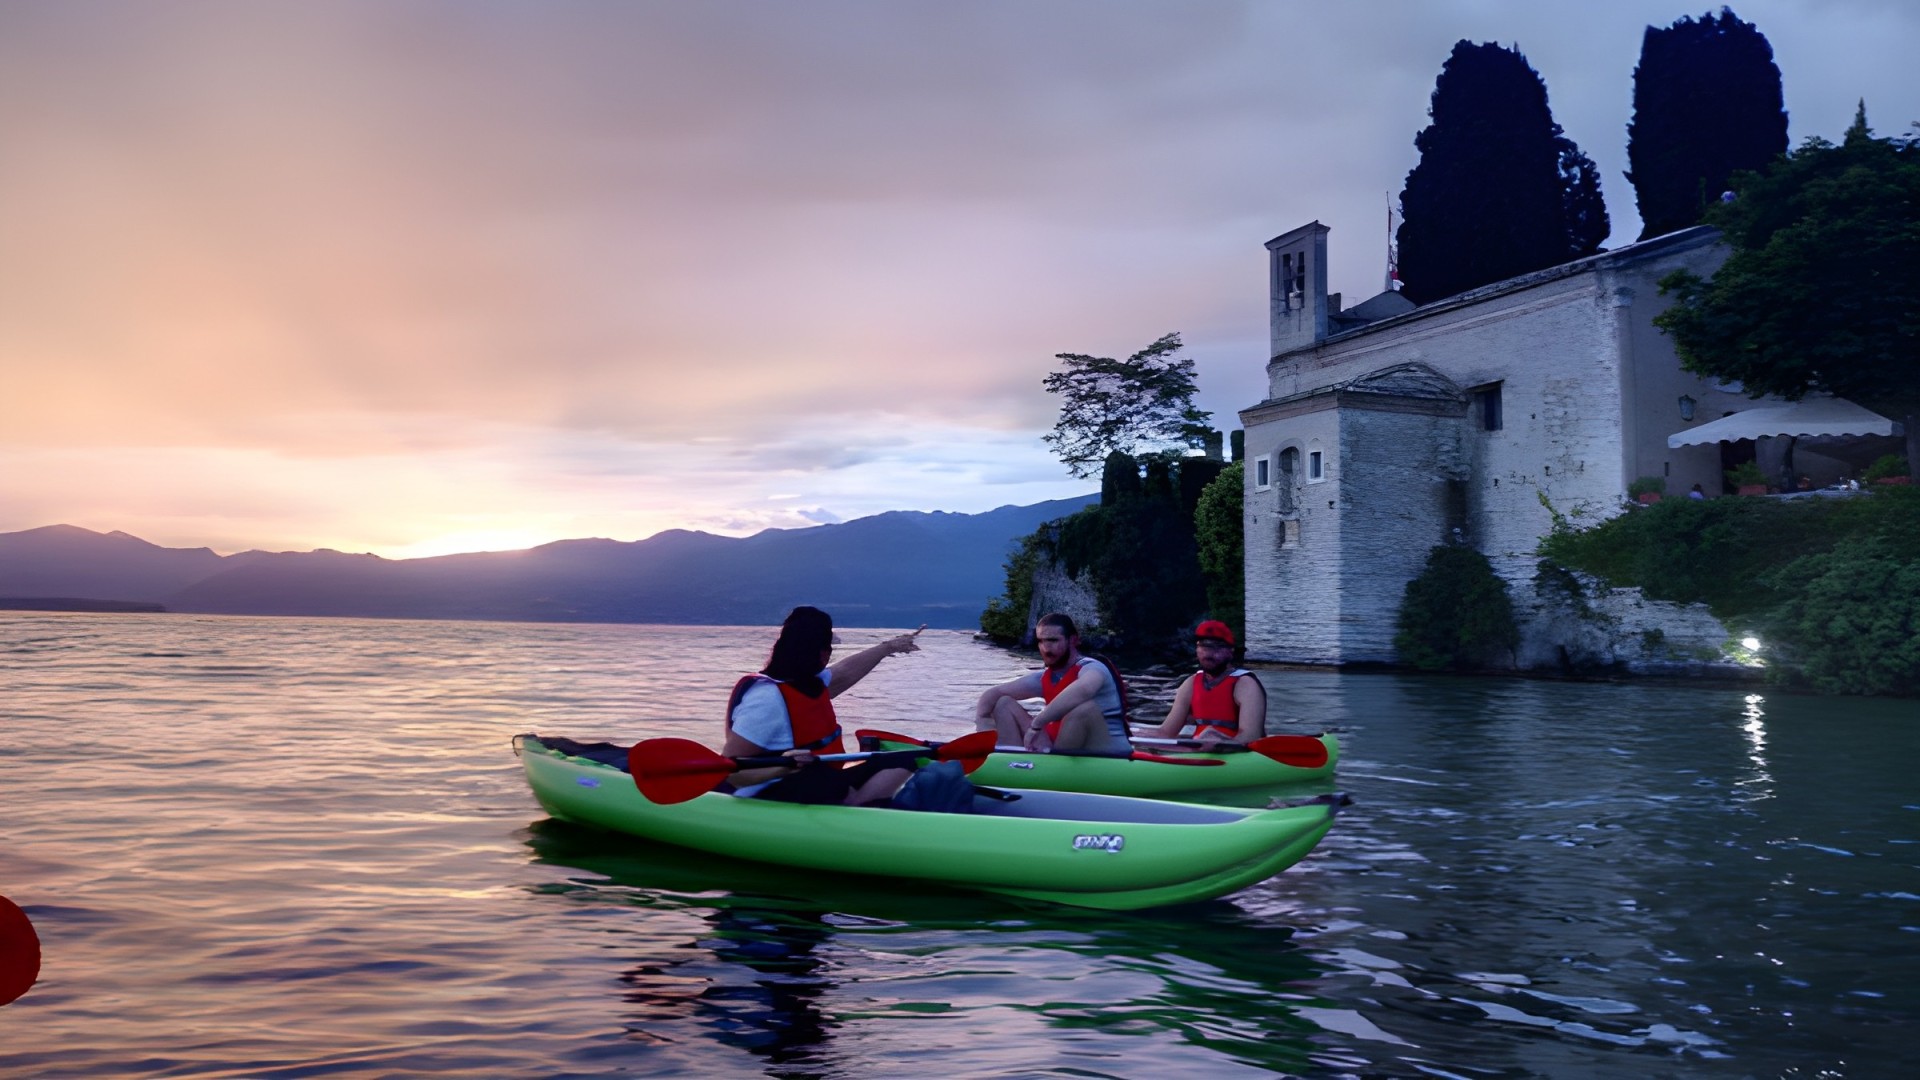 Sunset Canoe Tour from Garda to Punta San Vigilio with Included Aperitif